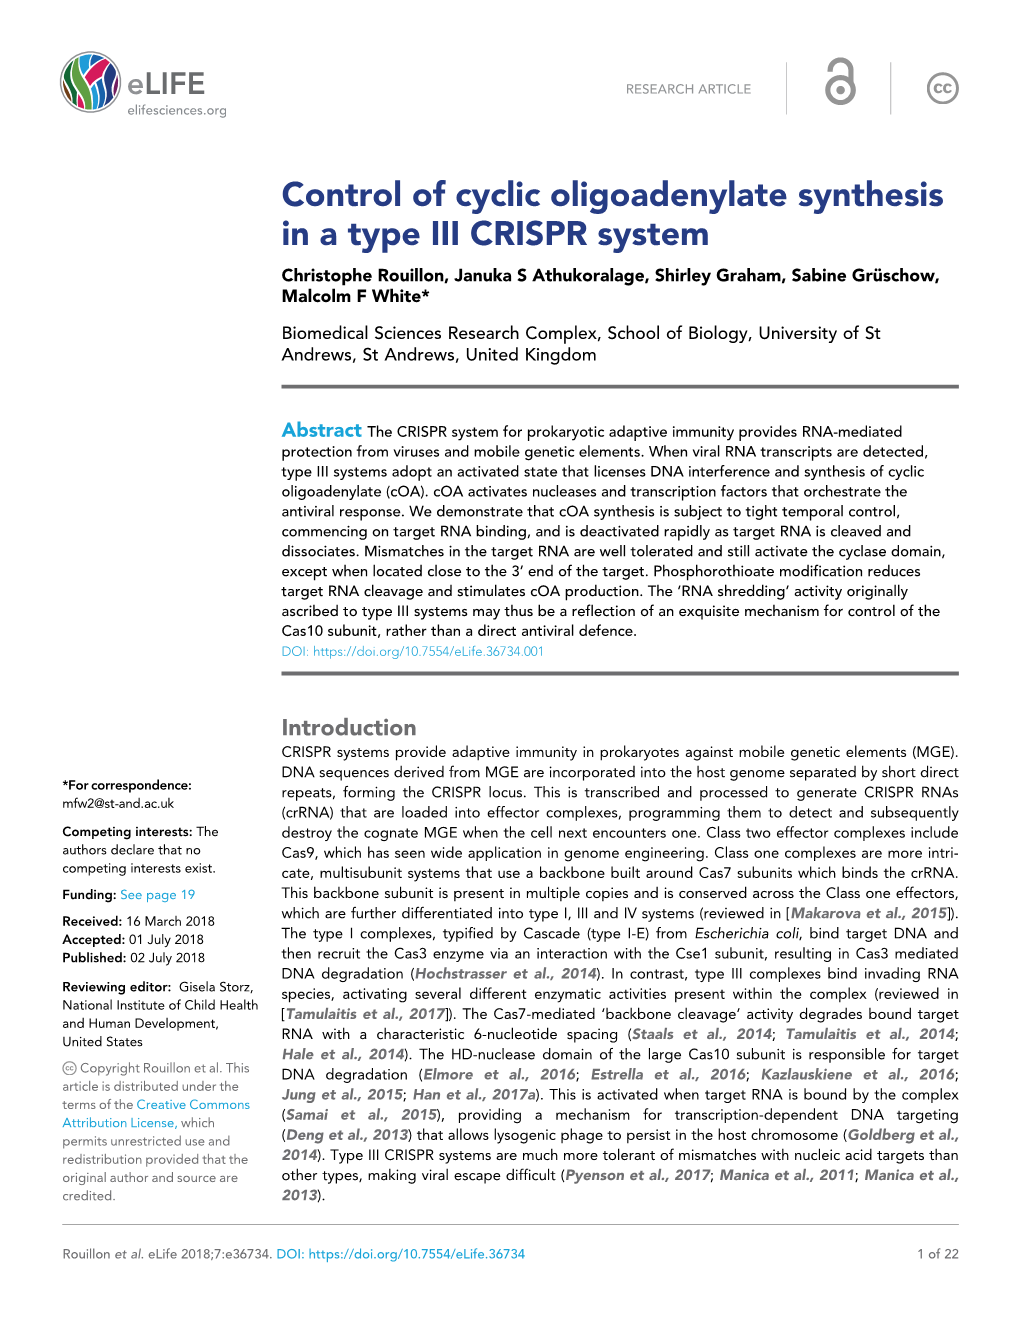 Control of Cyclic Oligoadenylate Synthesis in a Type III CRISPR System Christophe Rouillon, Januka S Athukoralage, Shirley Graham, Sabine Gru¨ Schow, Malcolm F White*